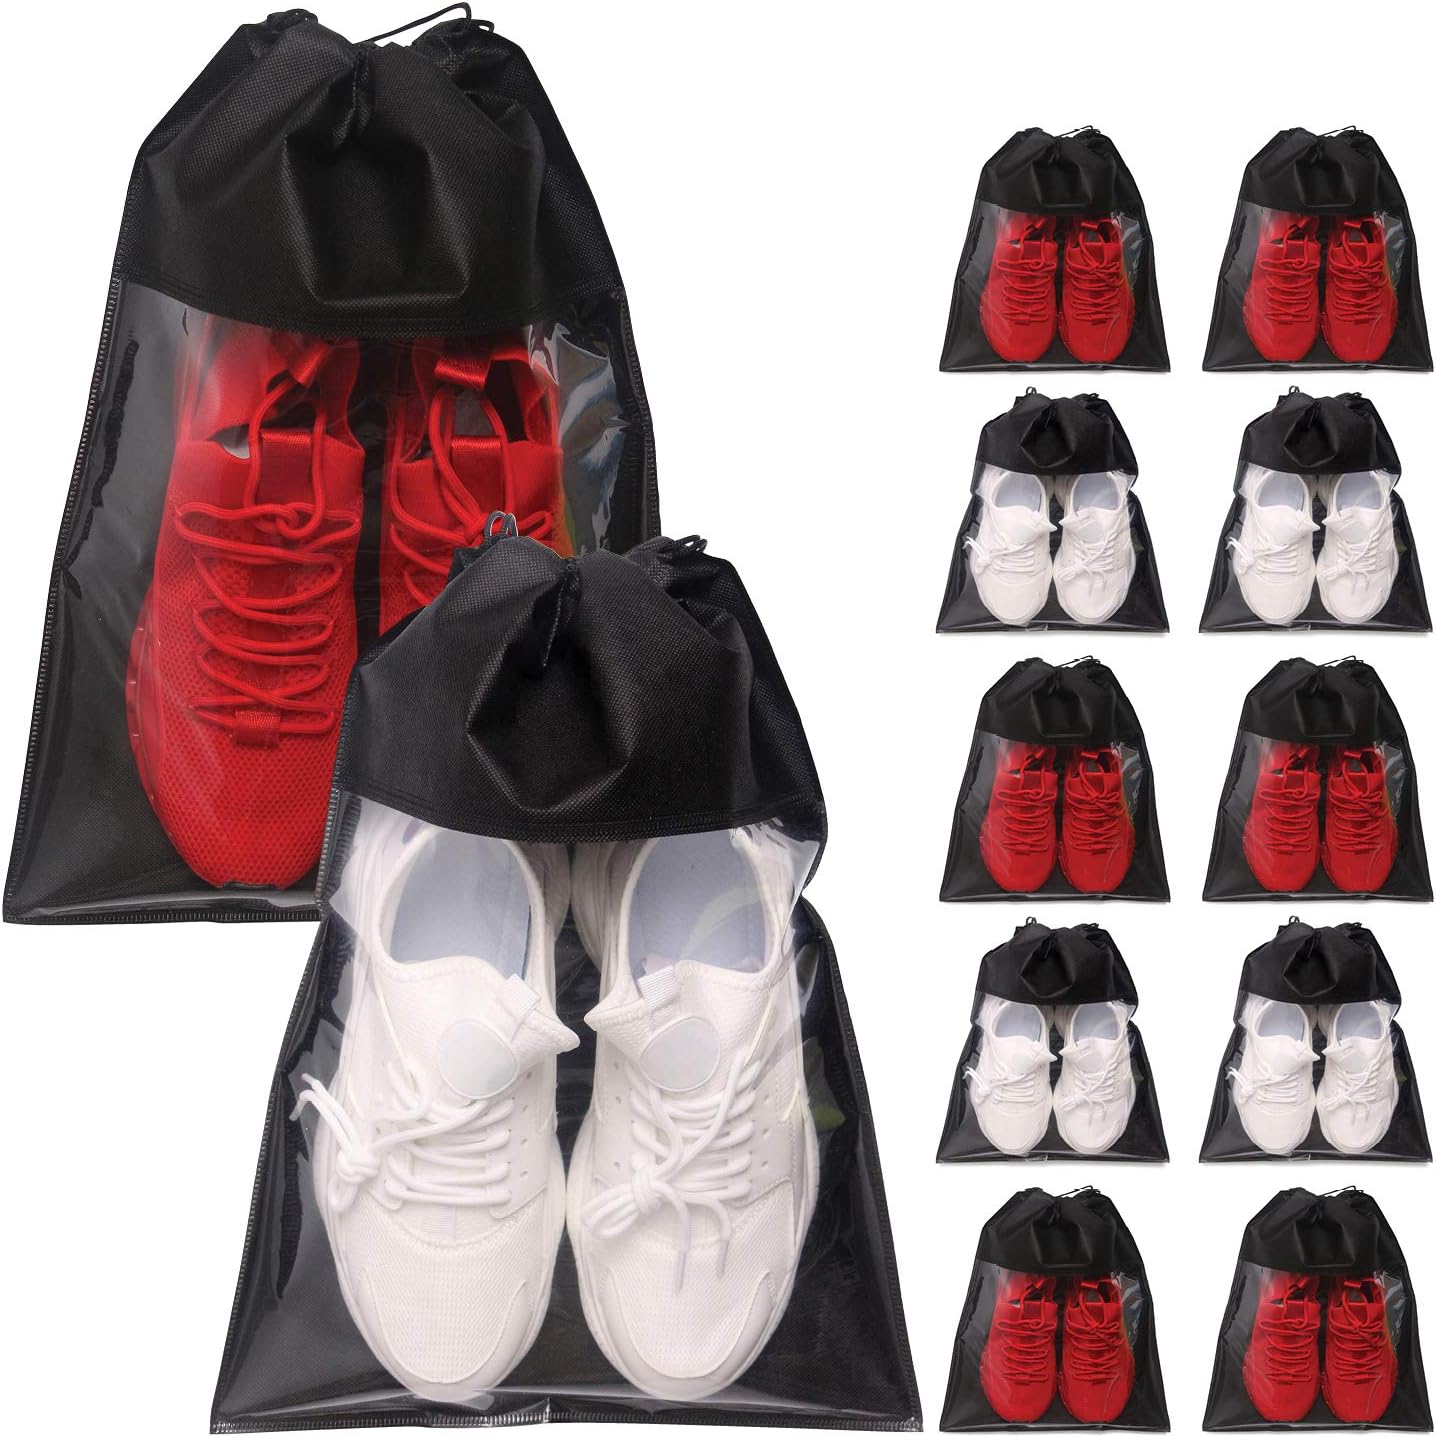 Portable Shoe Bags for Travel - Large Shoes Pouches with Clear Window and Drawstring - Unisex Black